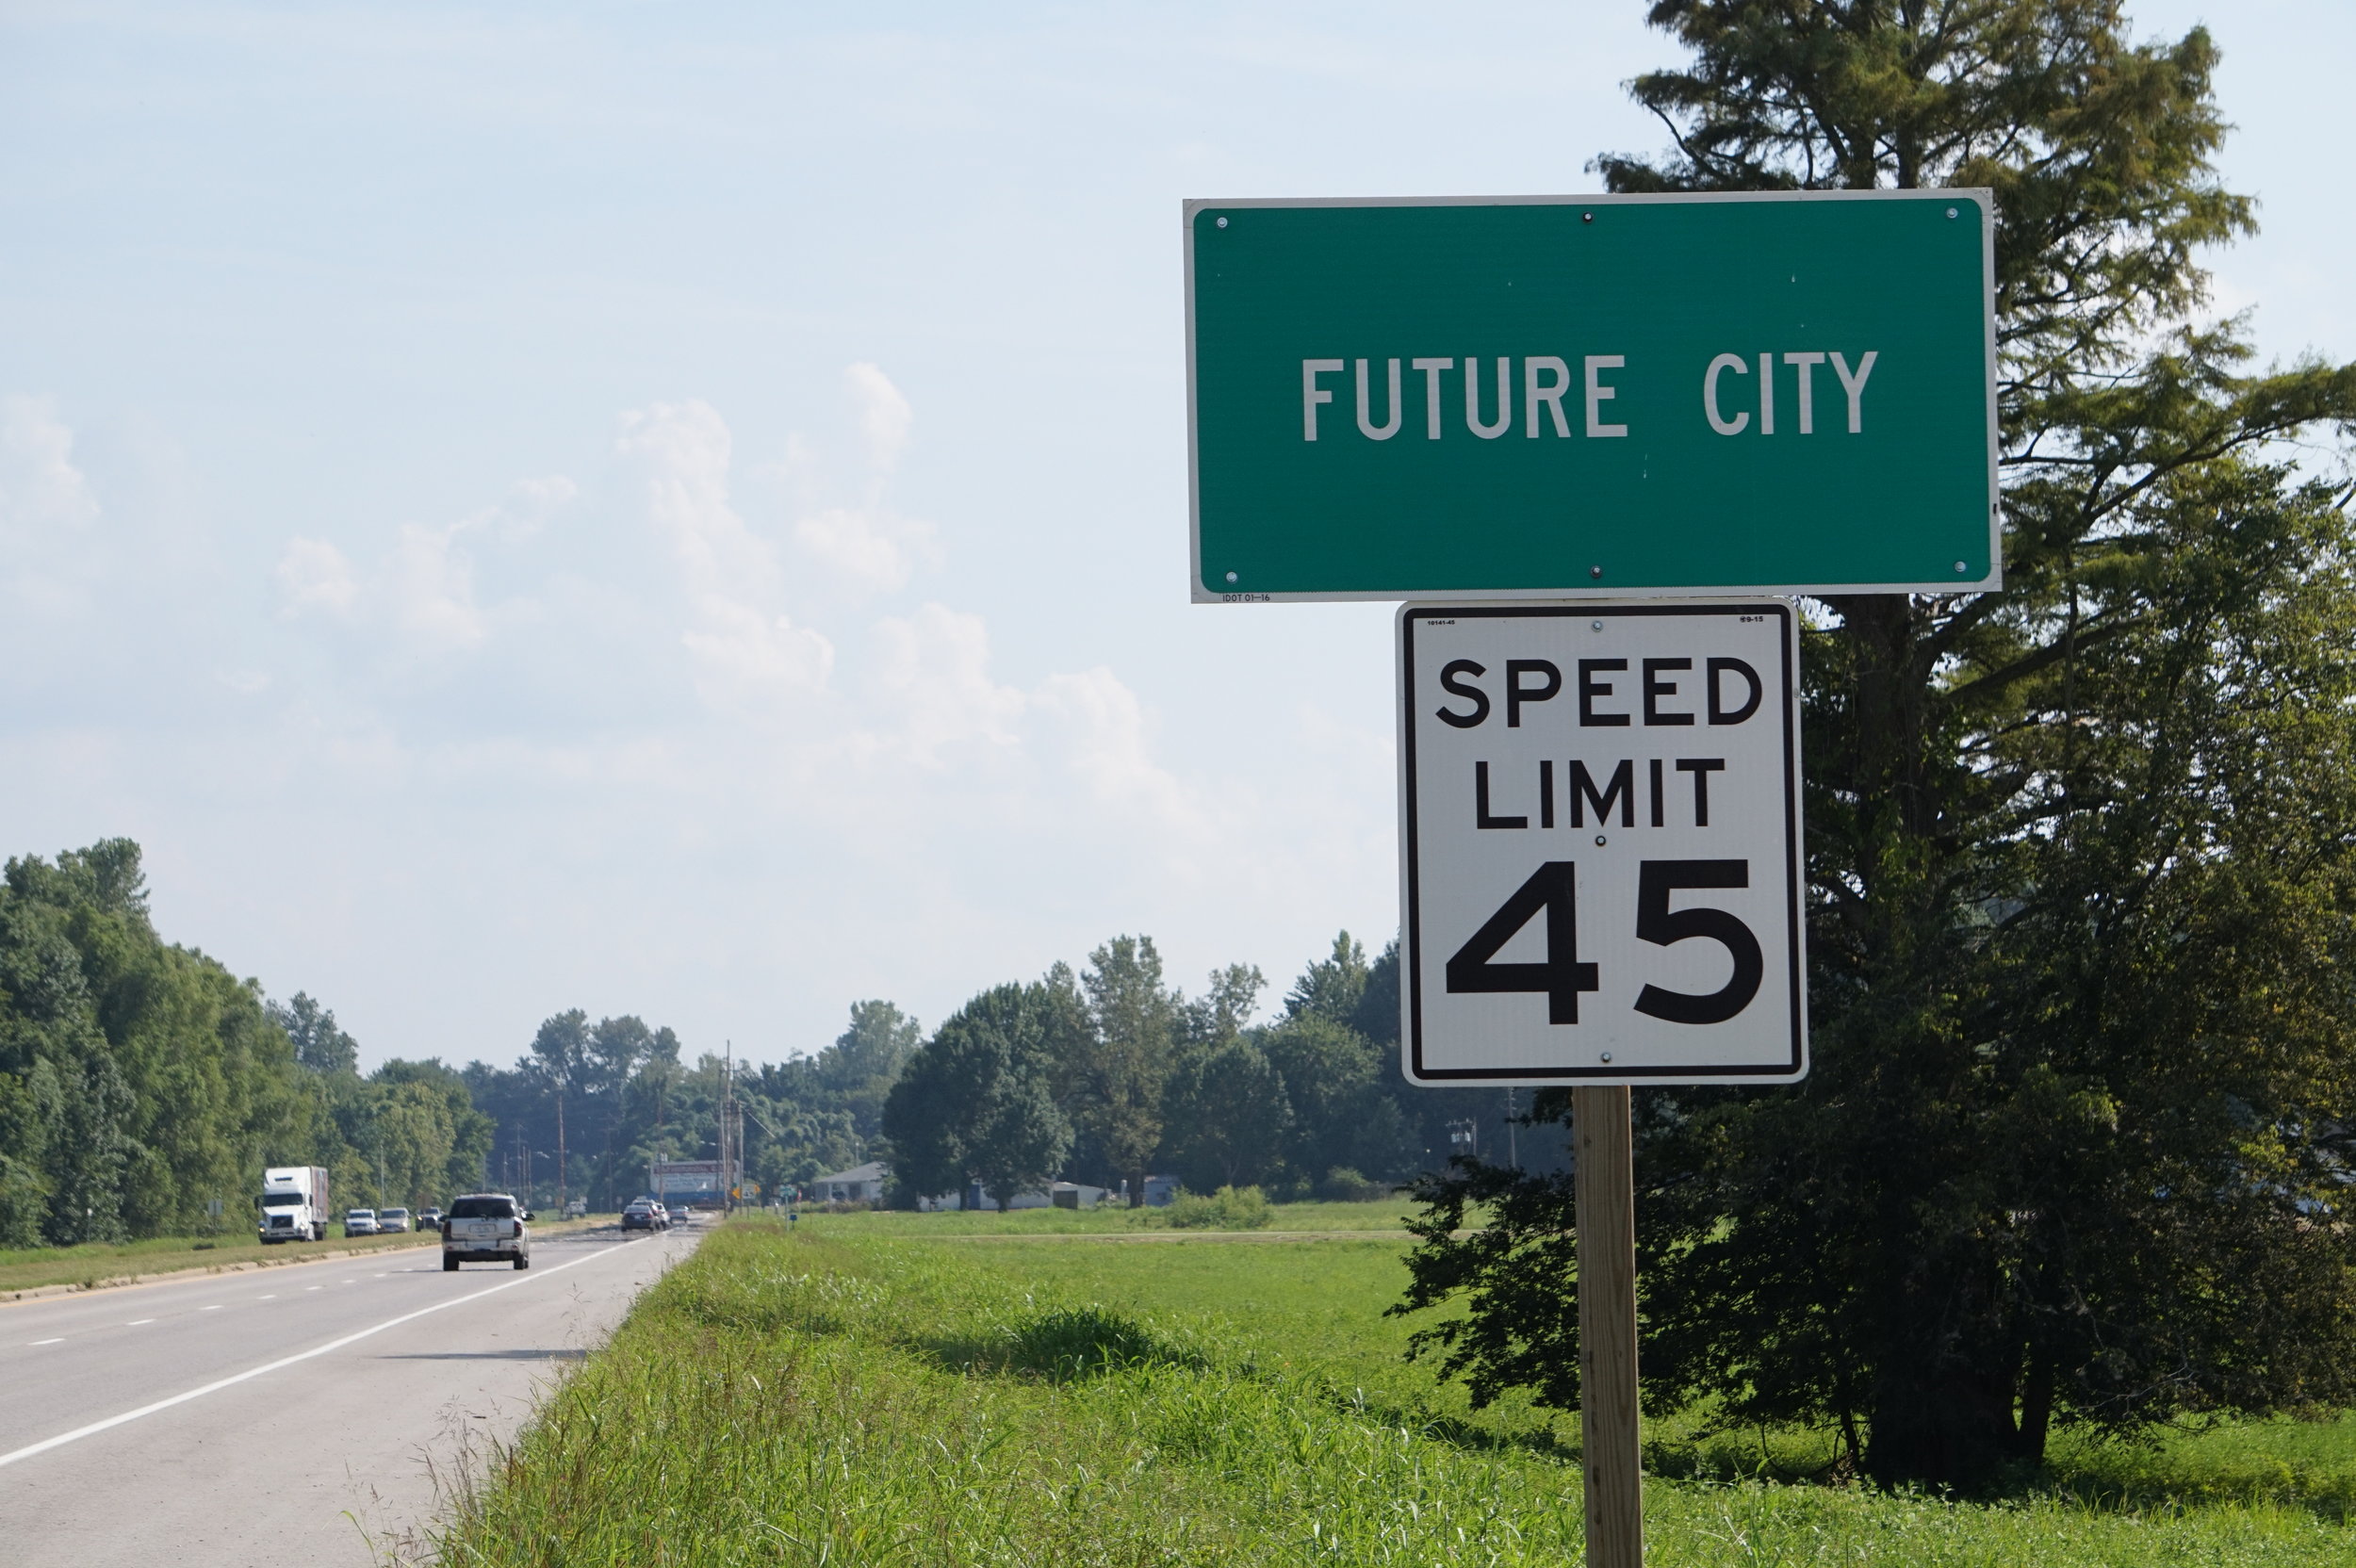  The Future City marker on US 51 approaching Cairo, IL. 